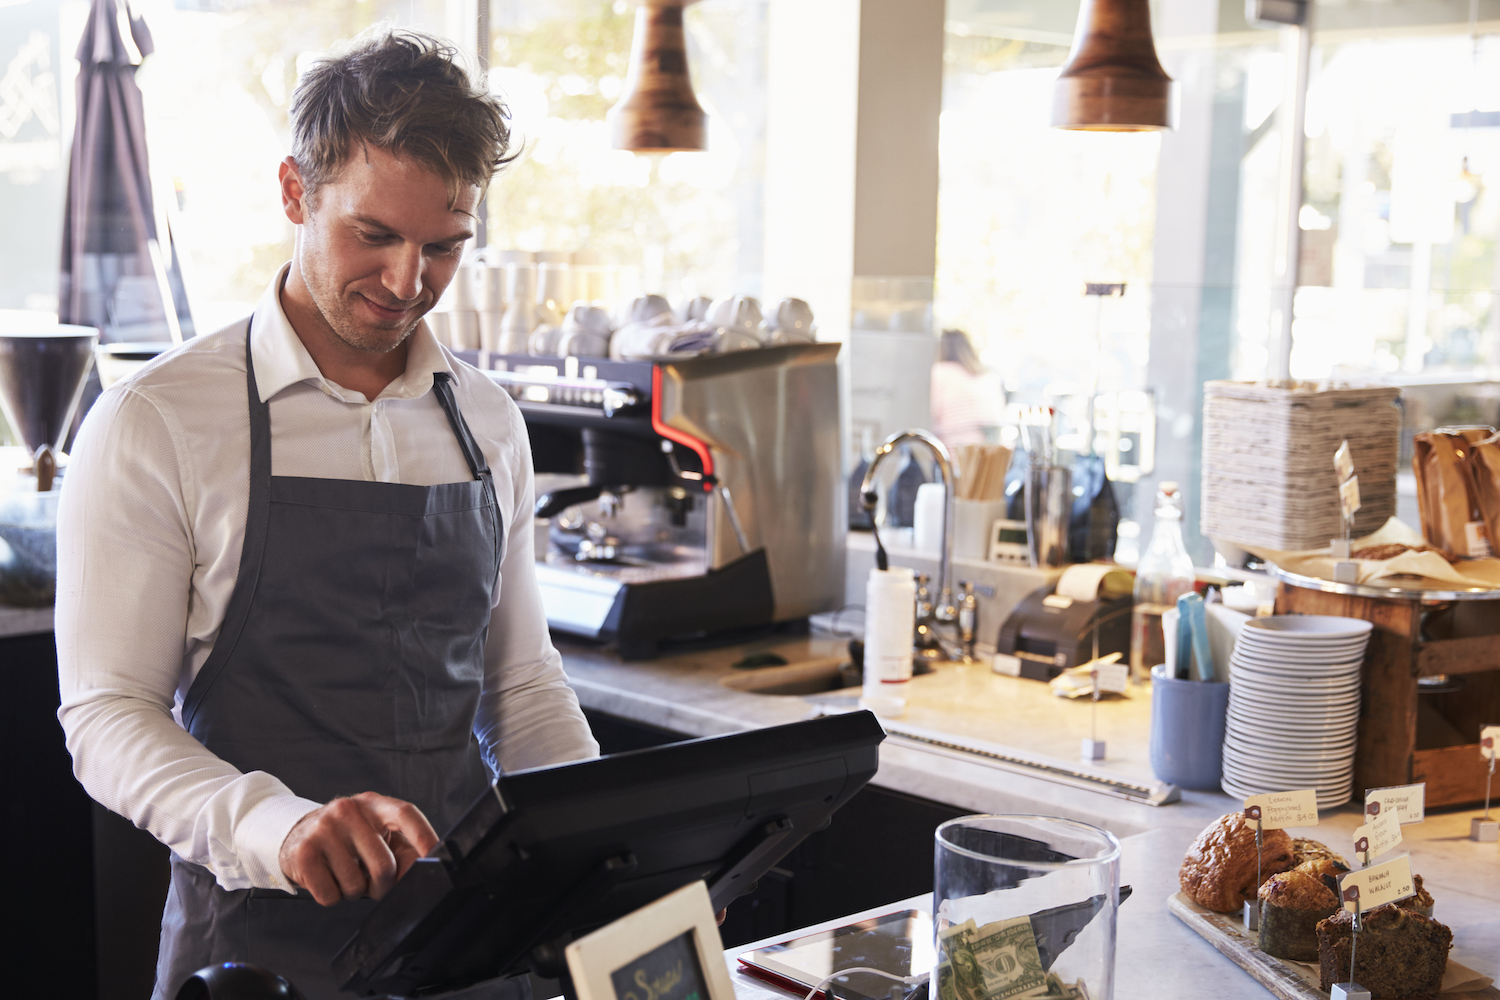 Employee vs Self-Employed: How Does It Affect My Borrowing?